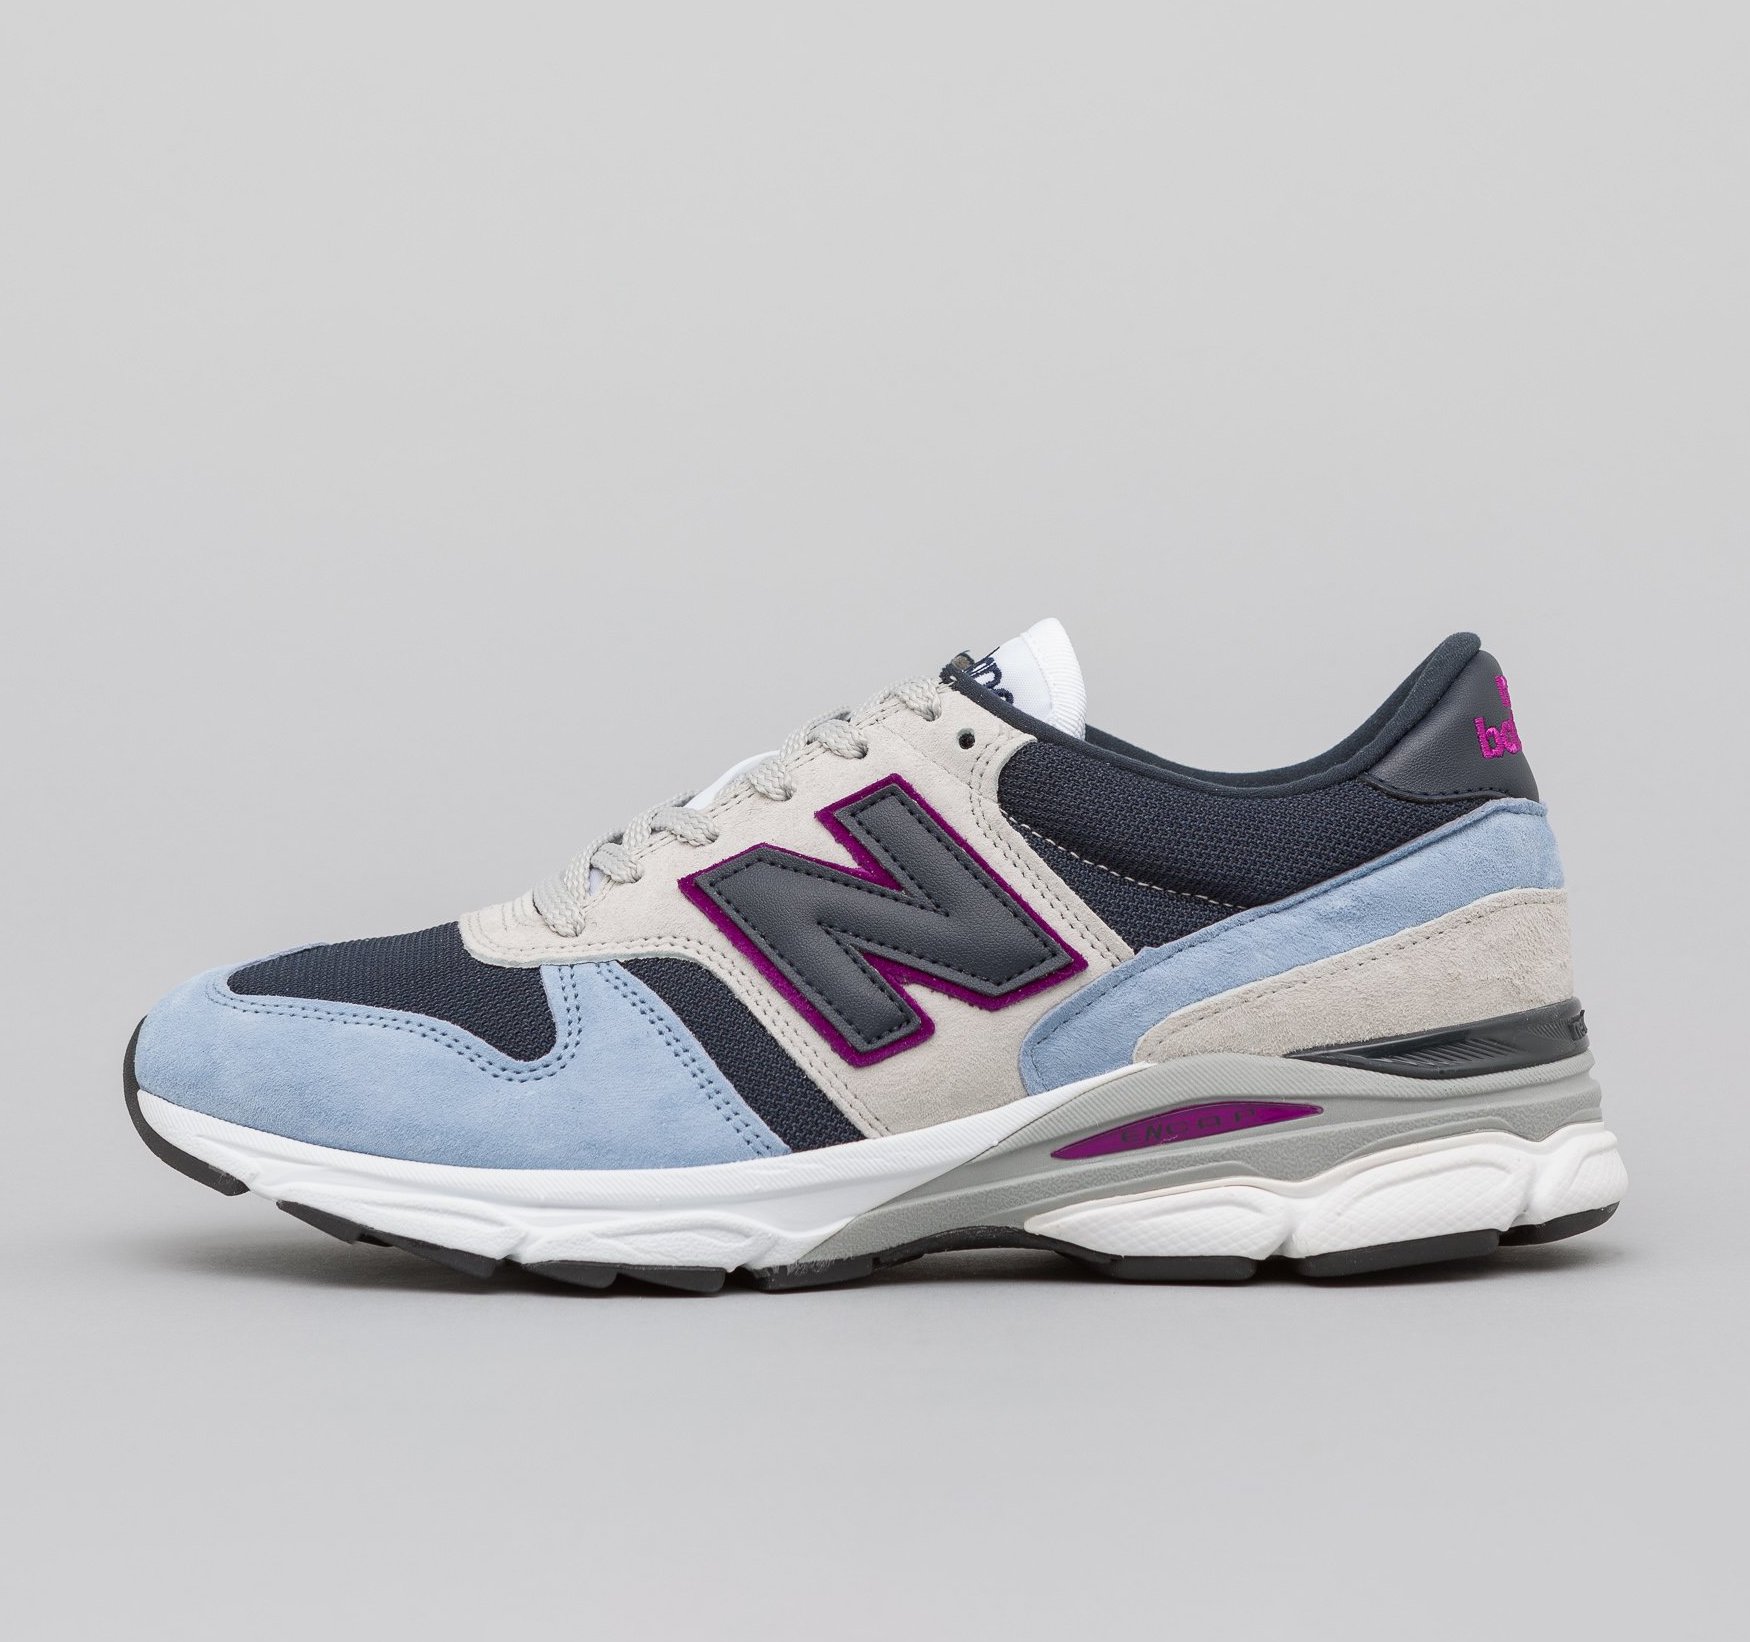 Now Available: New Balance 770.9 UK 